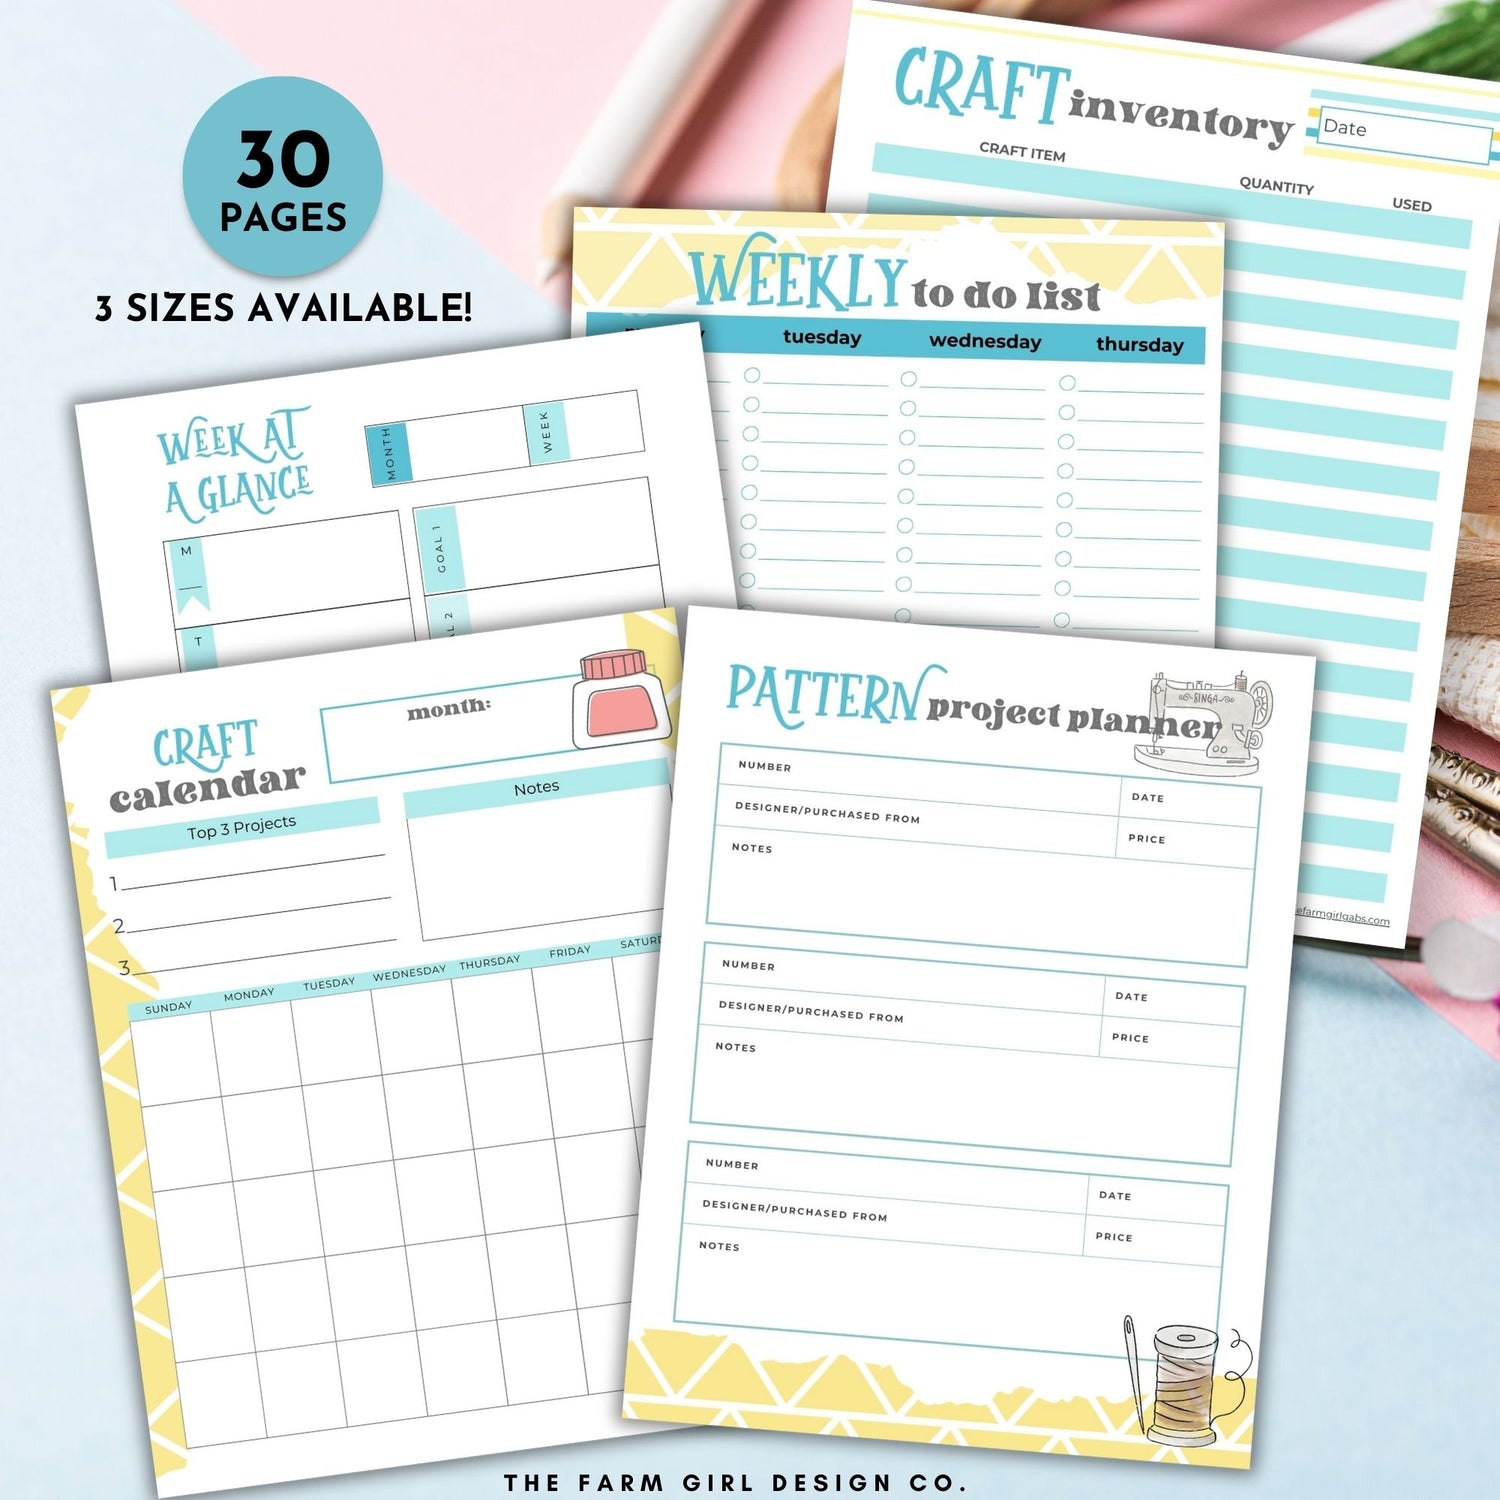 Craft Project Planner